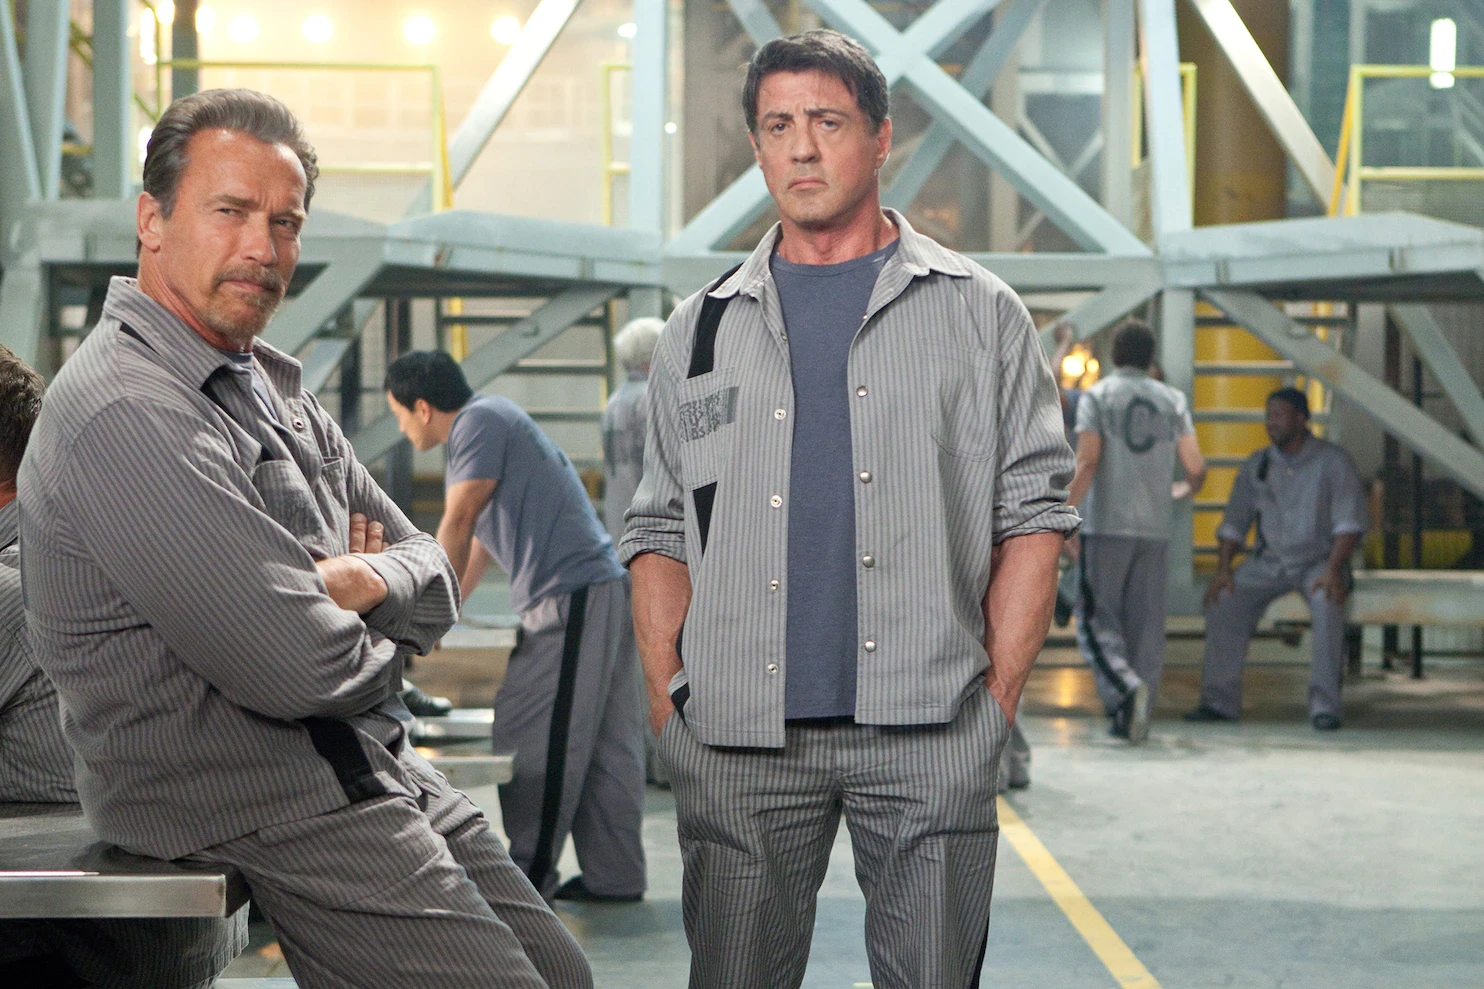 Arnold Schwarzenegger and Sylvester Stallone in a scene from Escape Plan